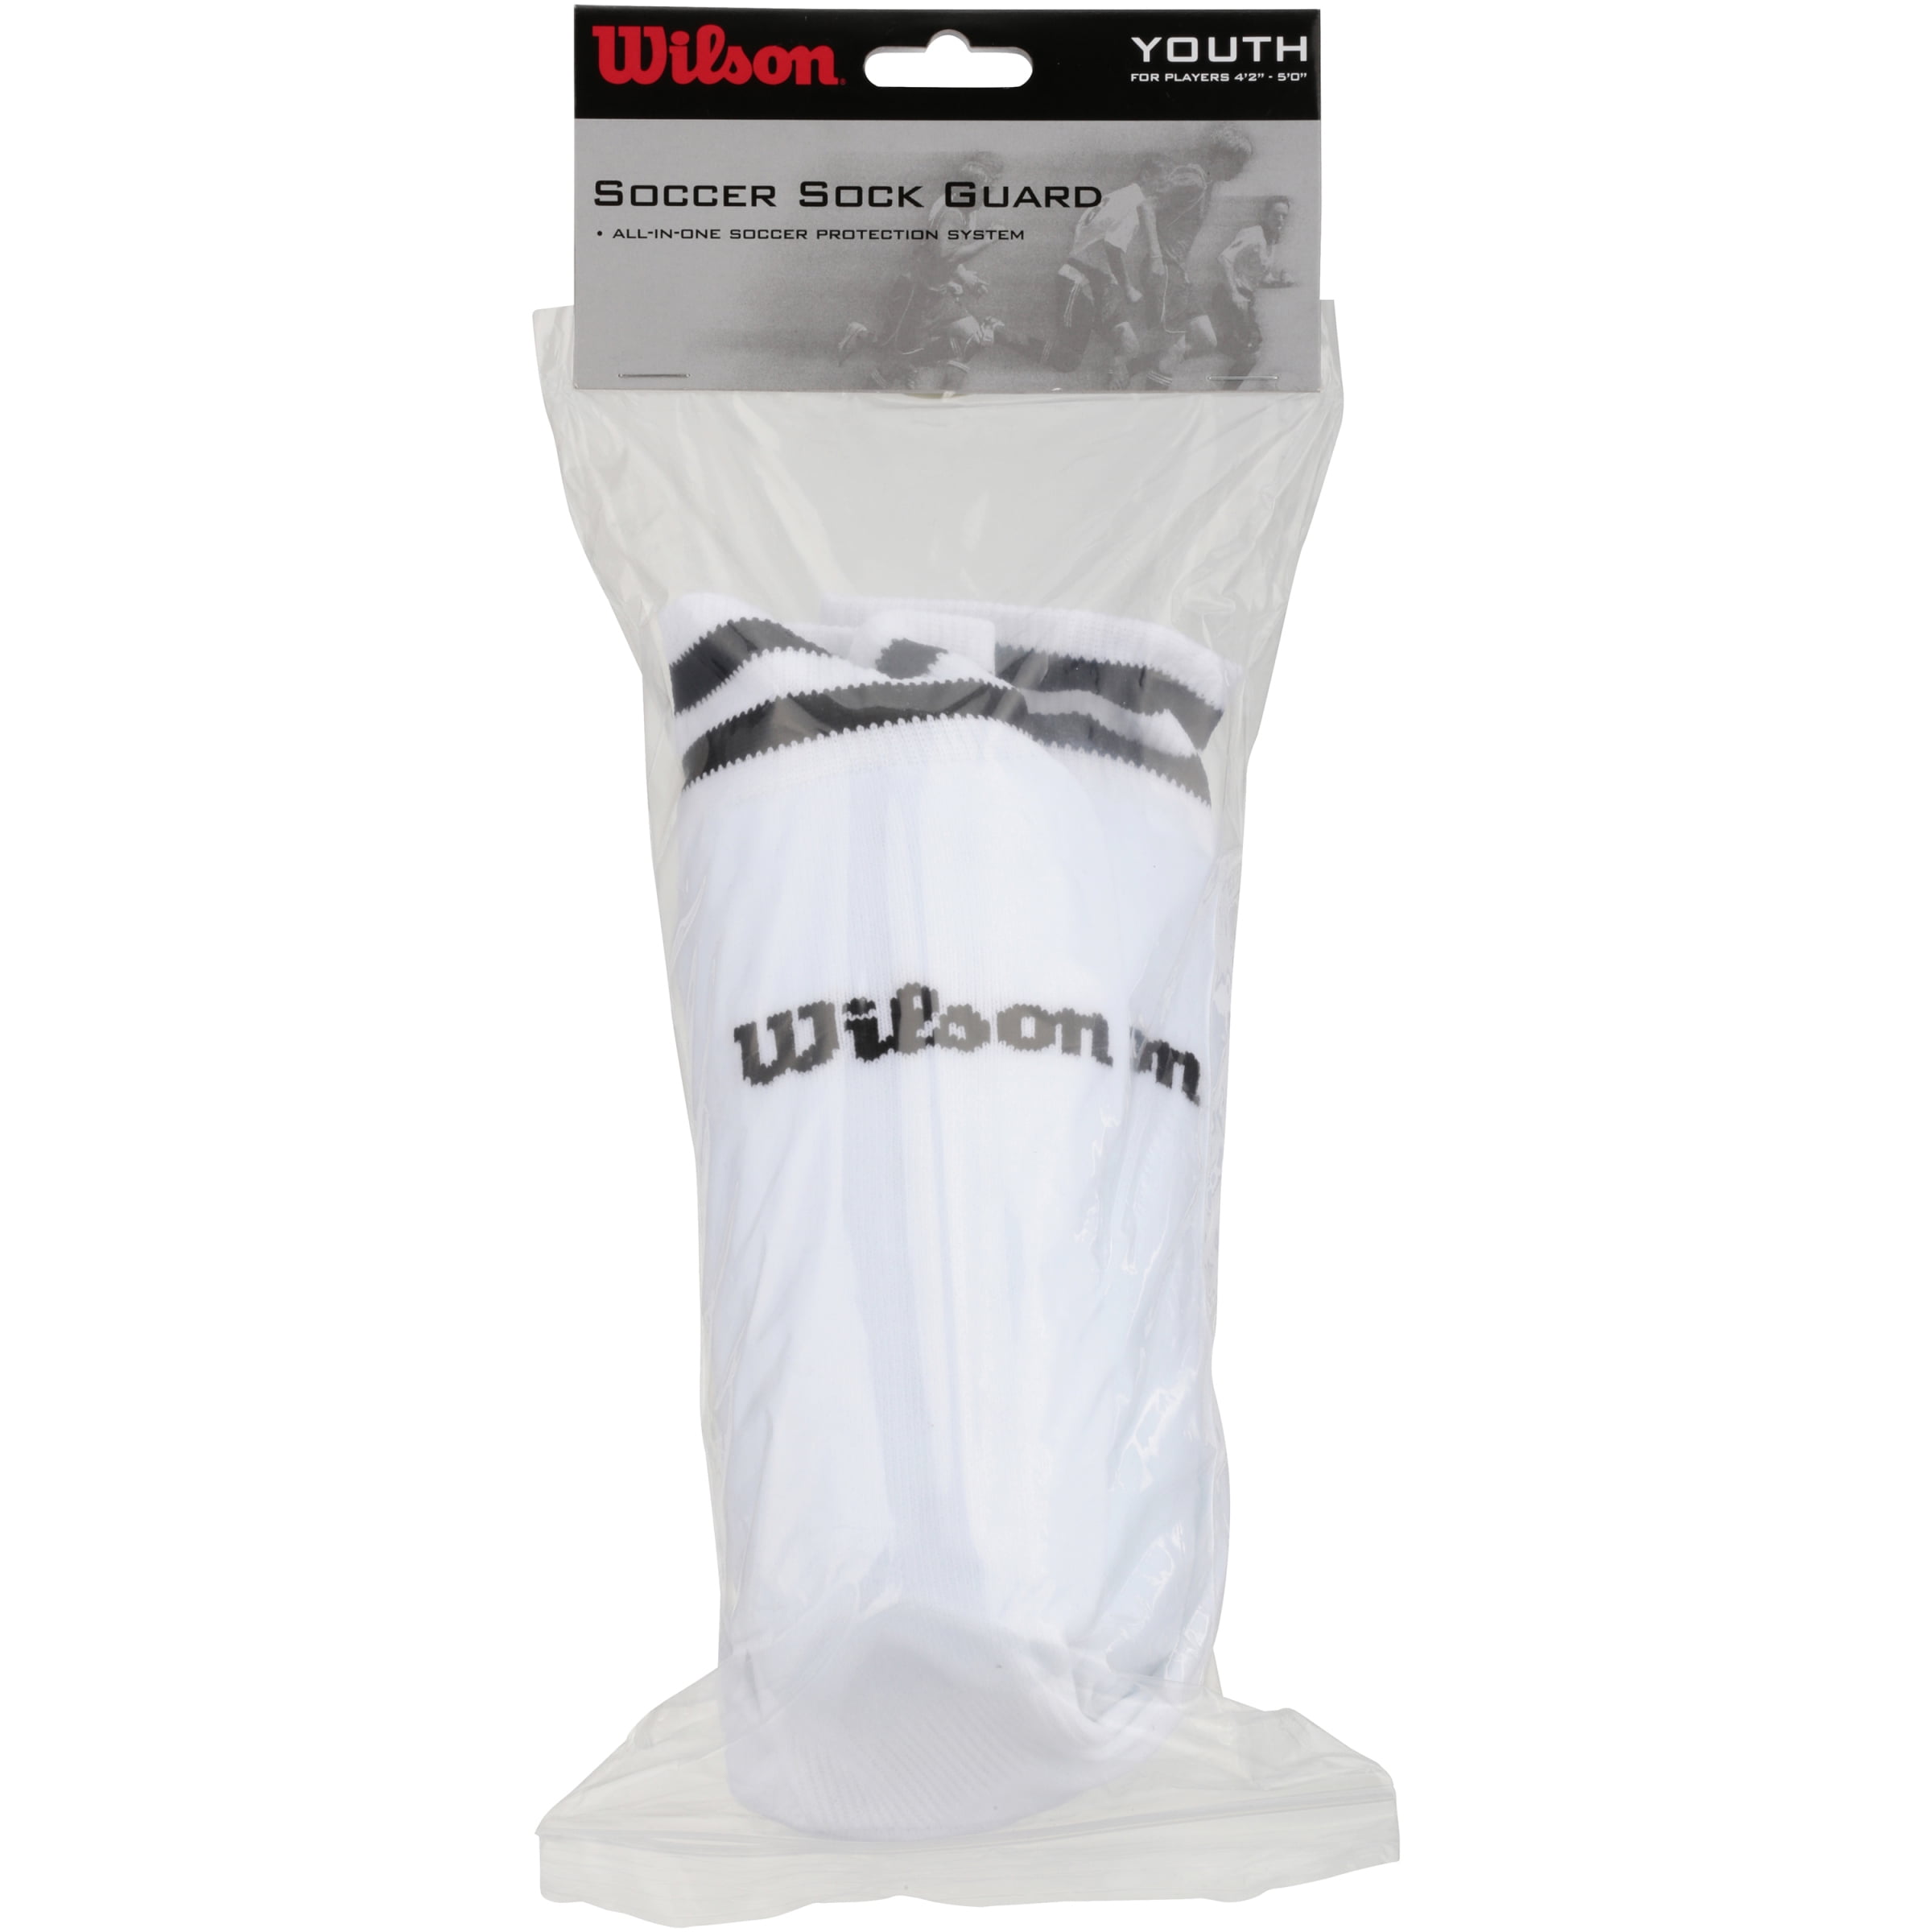 2 Packs Wilson PeeWee Up To 4'1" All In One Soccer Sock Guard Protection System